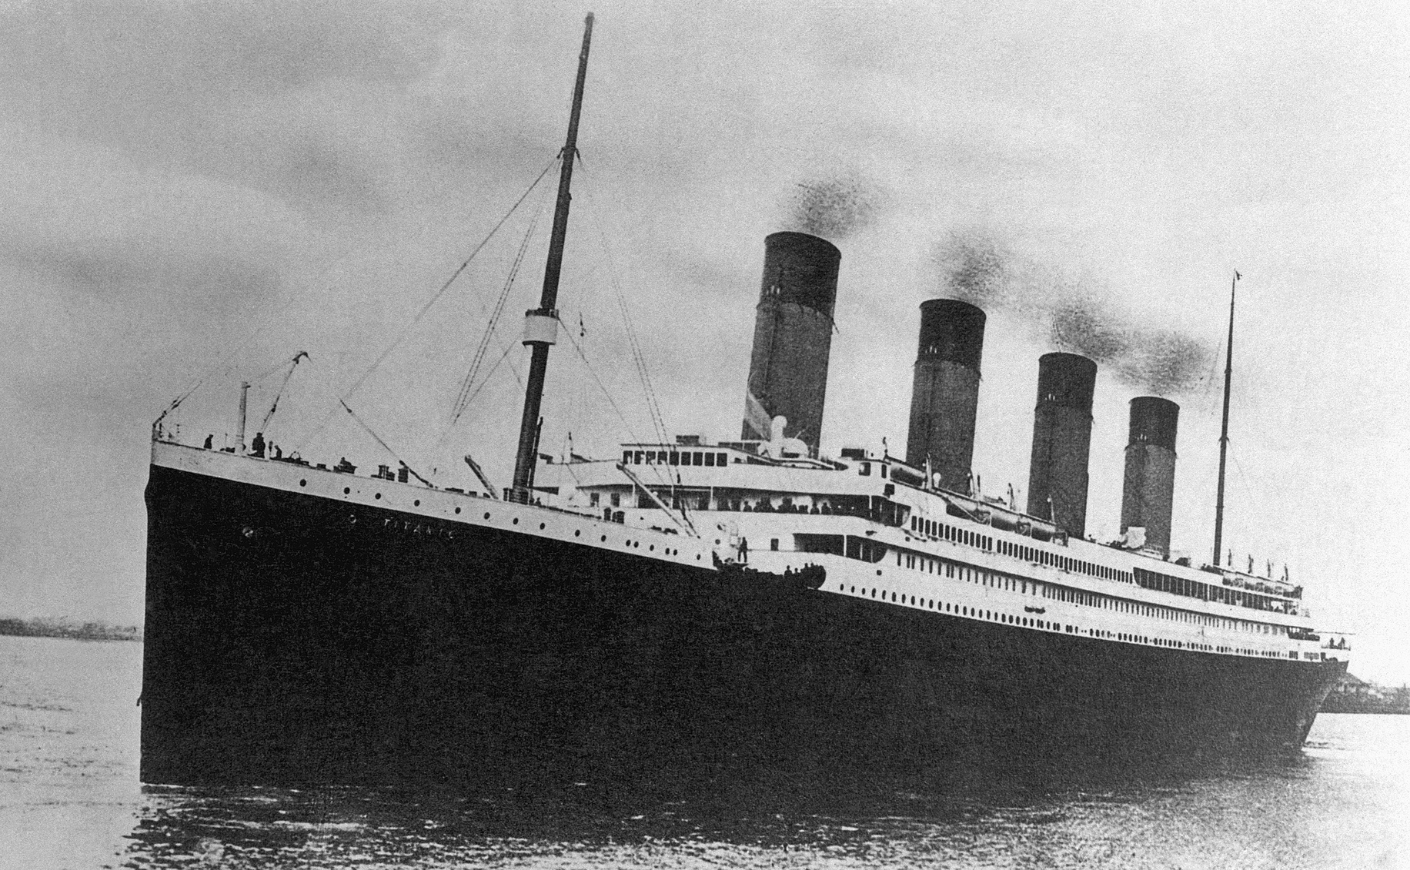 The Titanic sets out for its maiden voyage in 1912